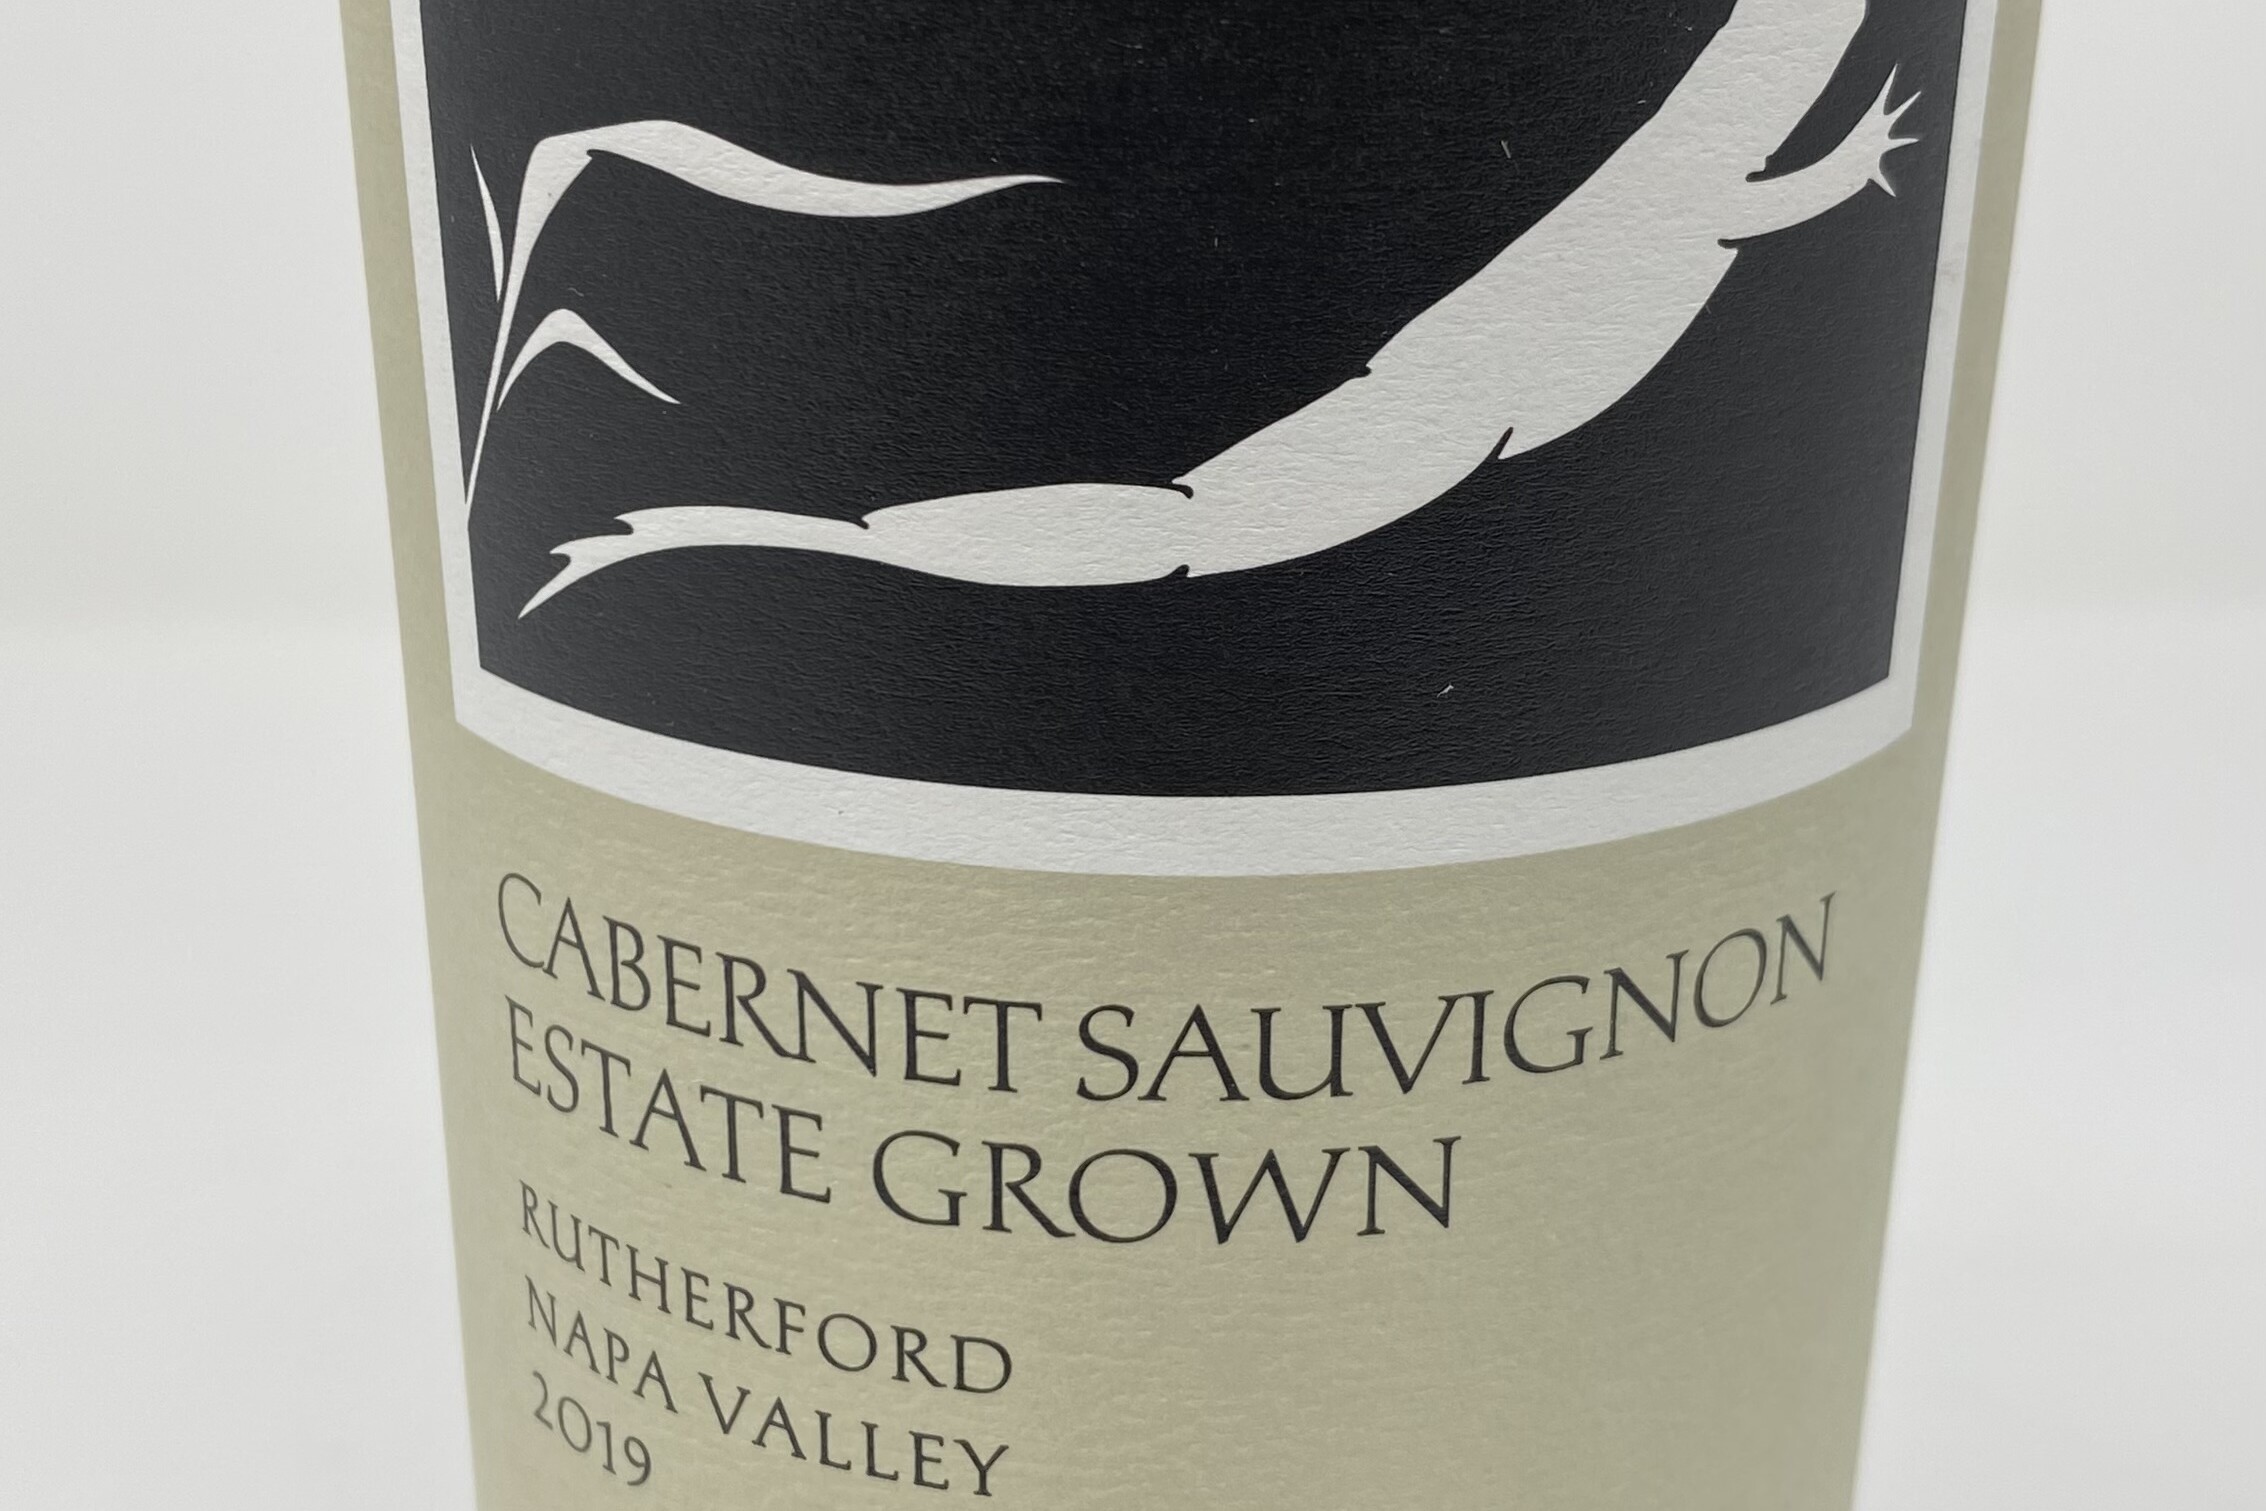 Frog's Leap, Cabernet Sauvignon Estate Grown Rutherford